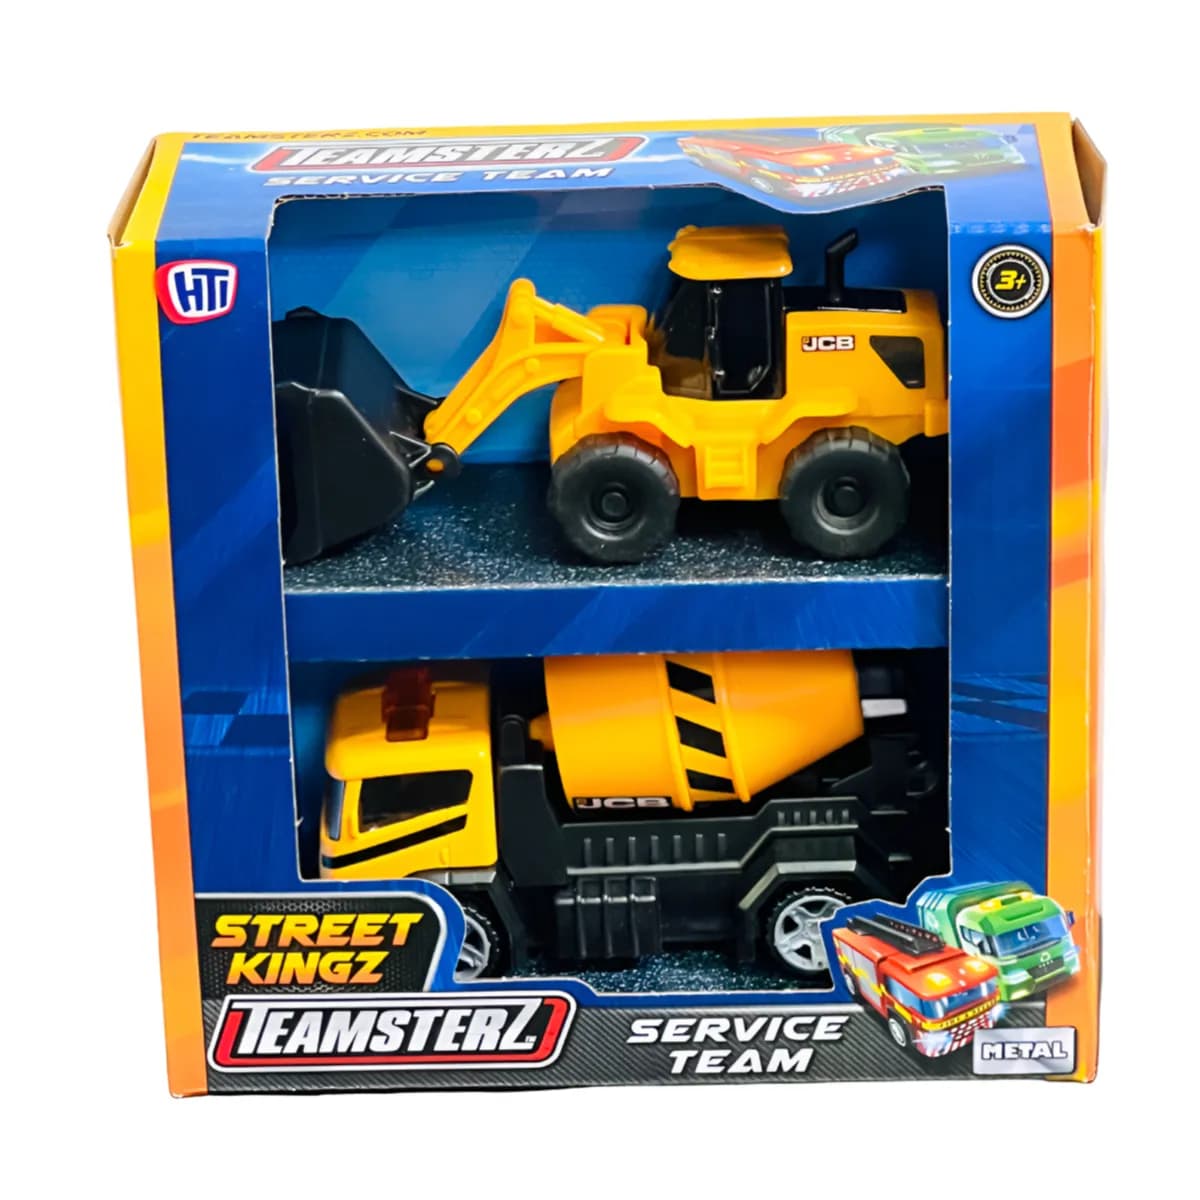 Teamsterz Street Construction Service Vehicle Play Set For Kids - Pack Of  2  (VLLT27)